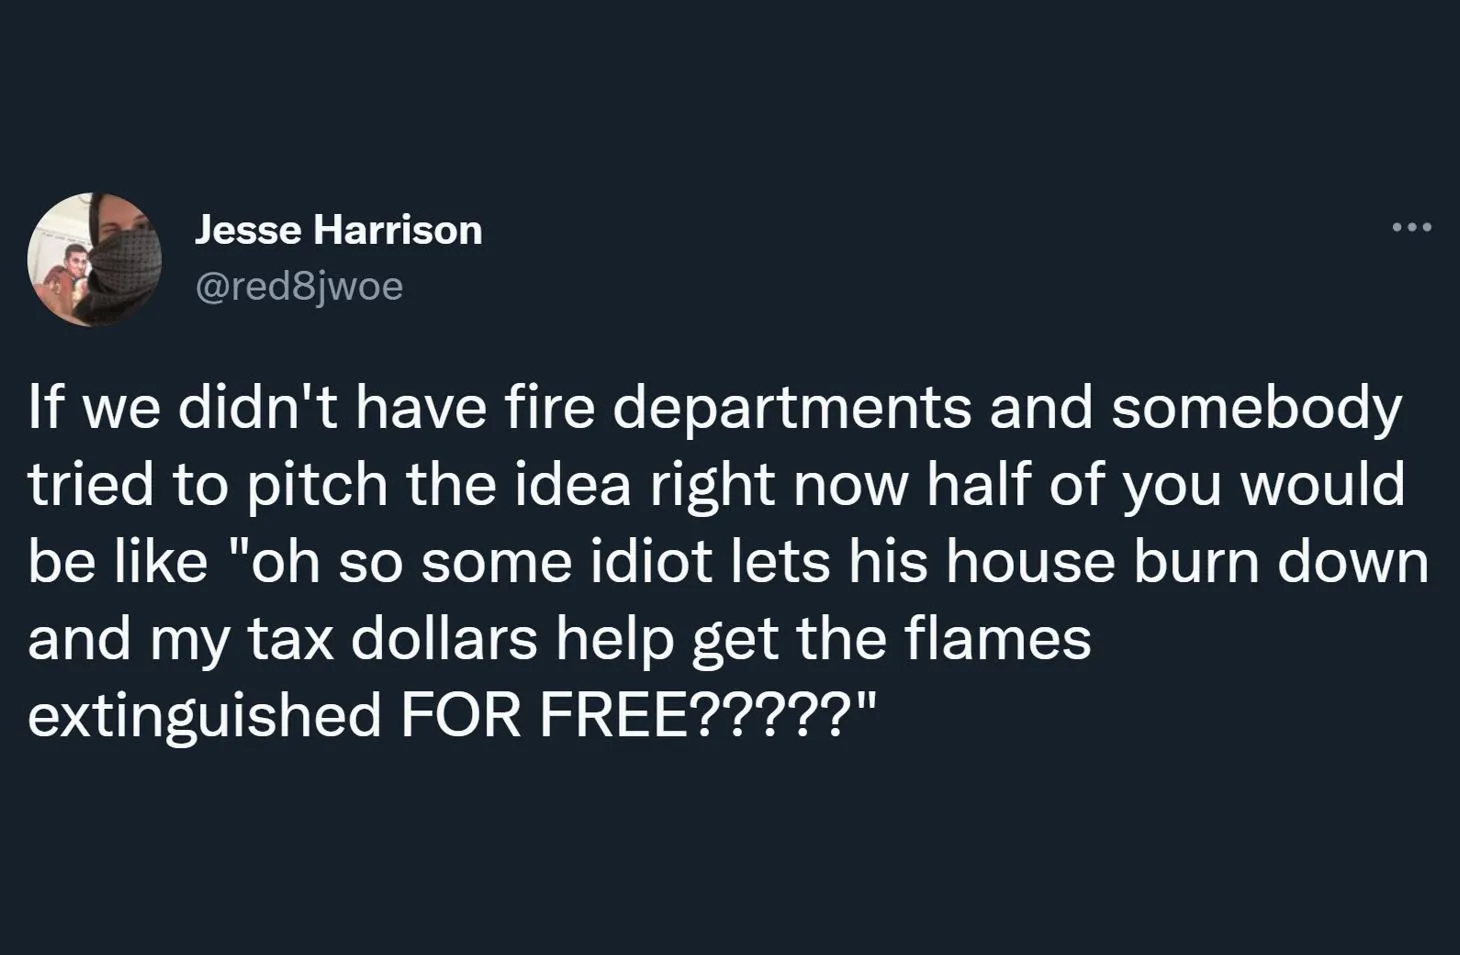 tweet about the importance of fire departments